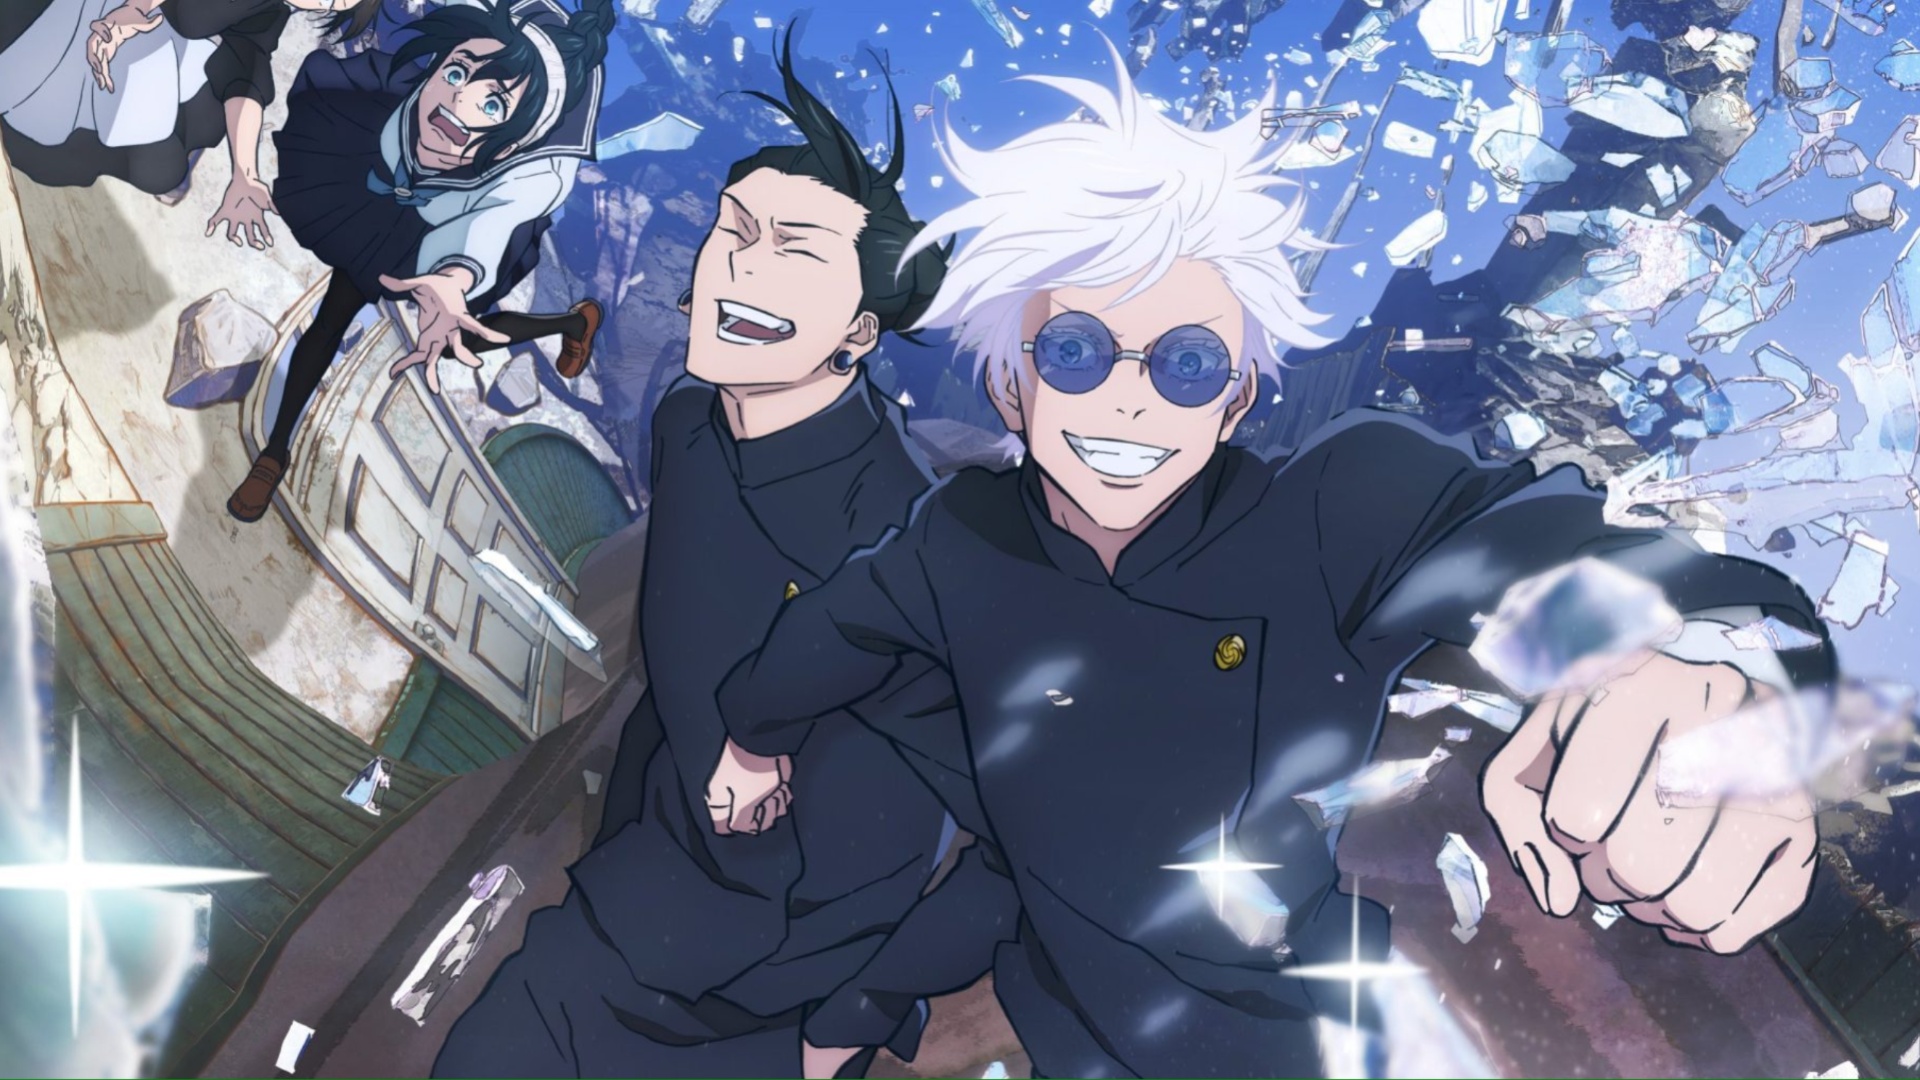 Anime Hajime Review: The World's Finest Assassin Gets Reincarnated in  Another World as an Aristocrat - Anime Hajime, the world's finest assassin  gets reincarnated in another world as an aristocrat anime release